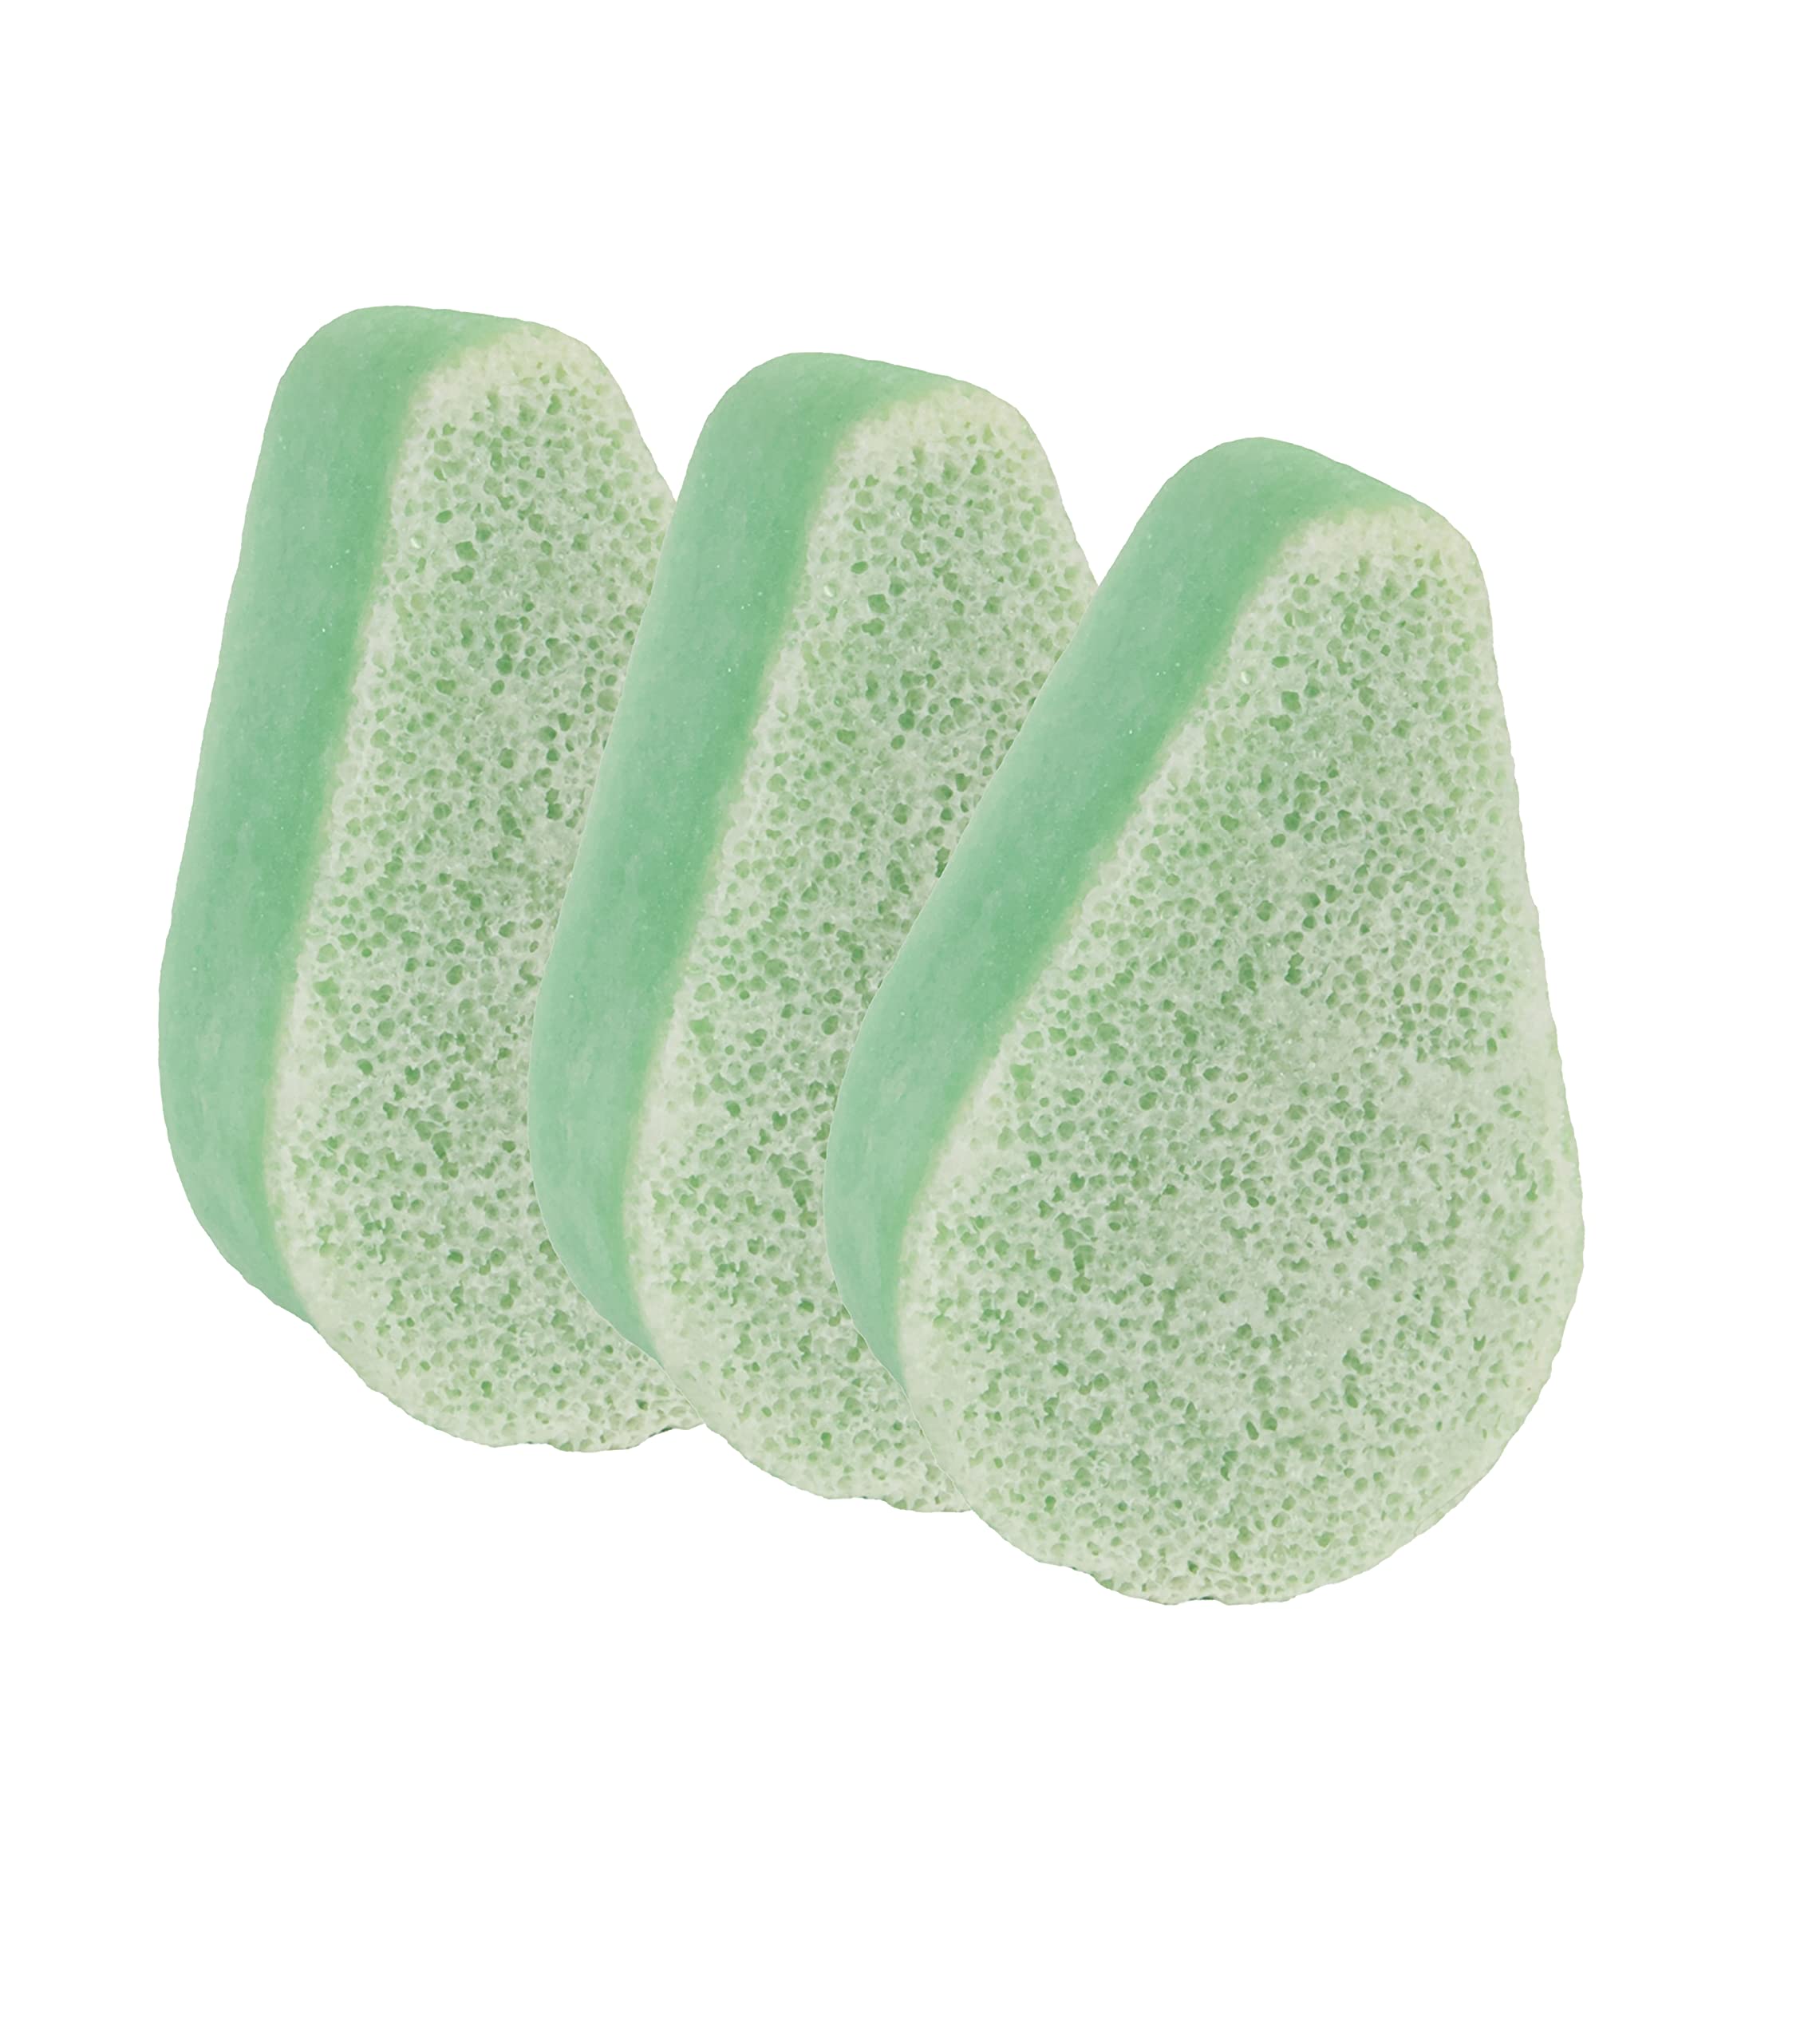 Spongeables Anti-Cellulite Body Wash in a Sponge, Reduce The Appearance of Cellulite Moisturizer and Exfoliator for The Body, Apple,(Pack of 3)